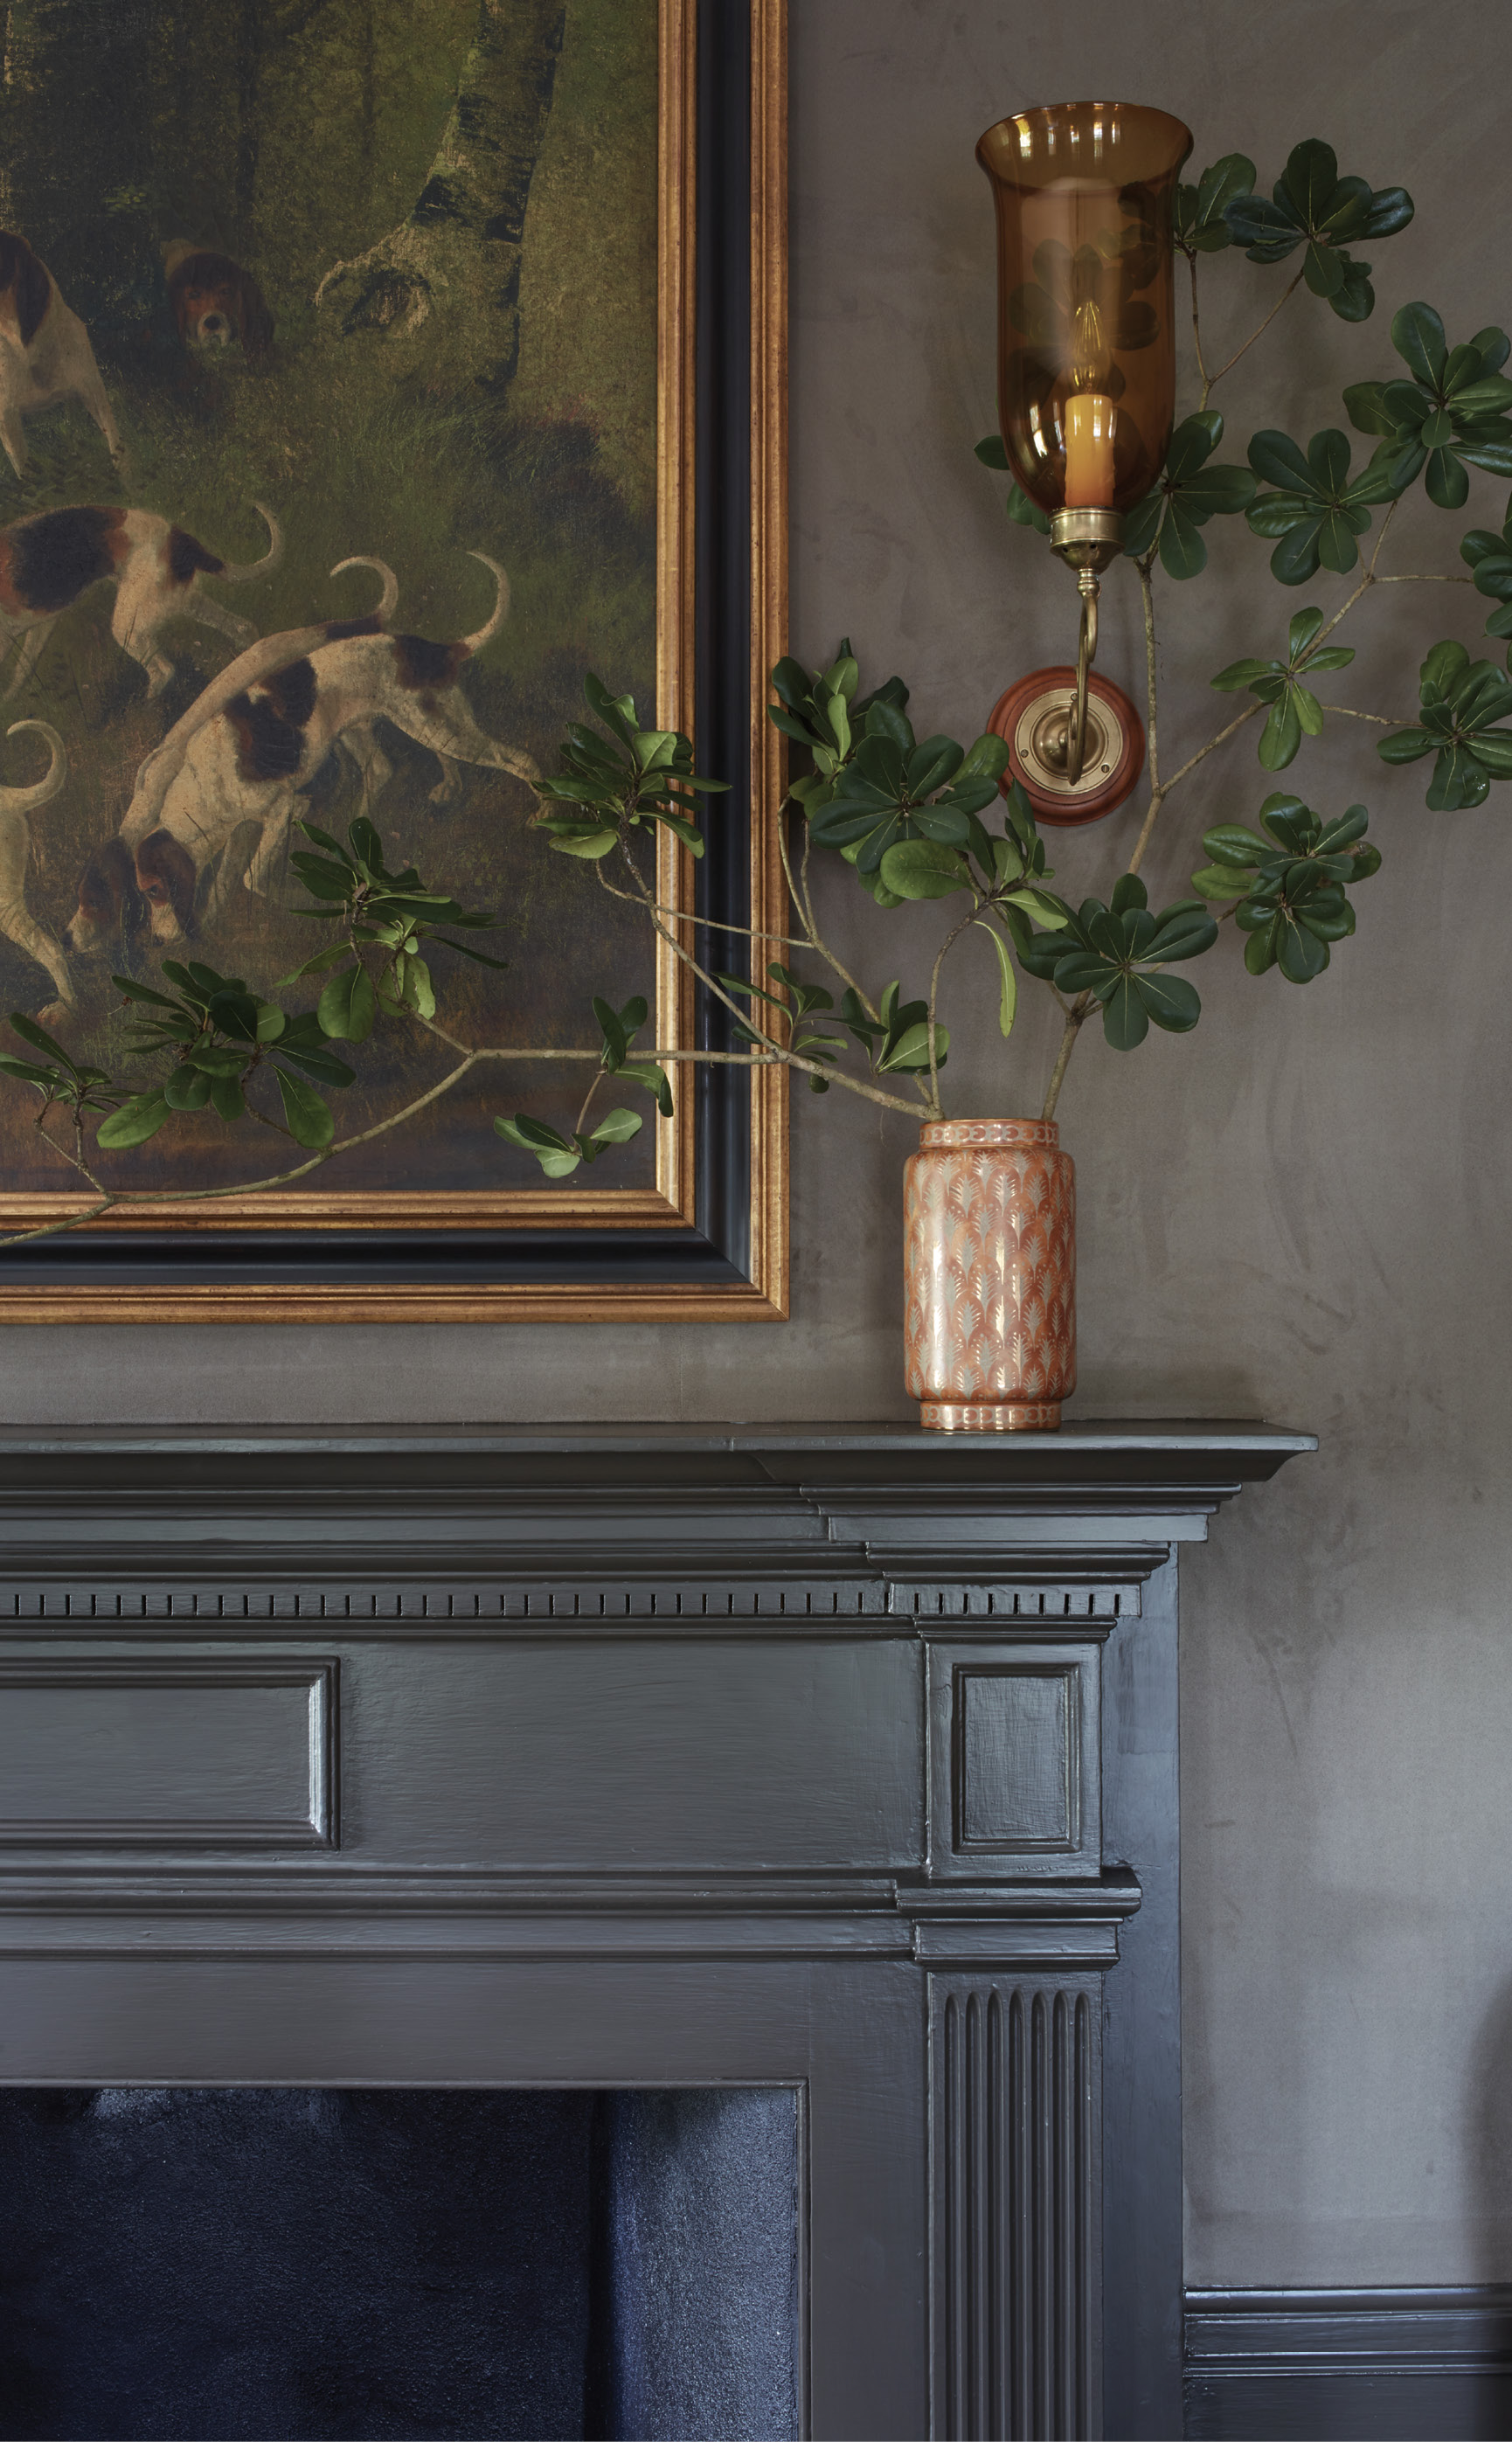 The homeowner’s personal art collection celebrating sporting dogs adorns the walls and takes pride of place above the mantel.